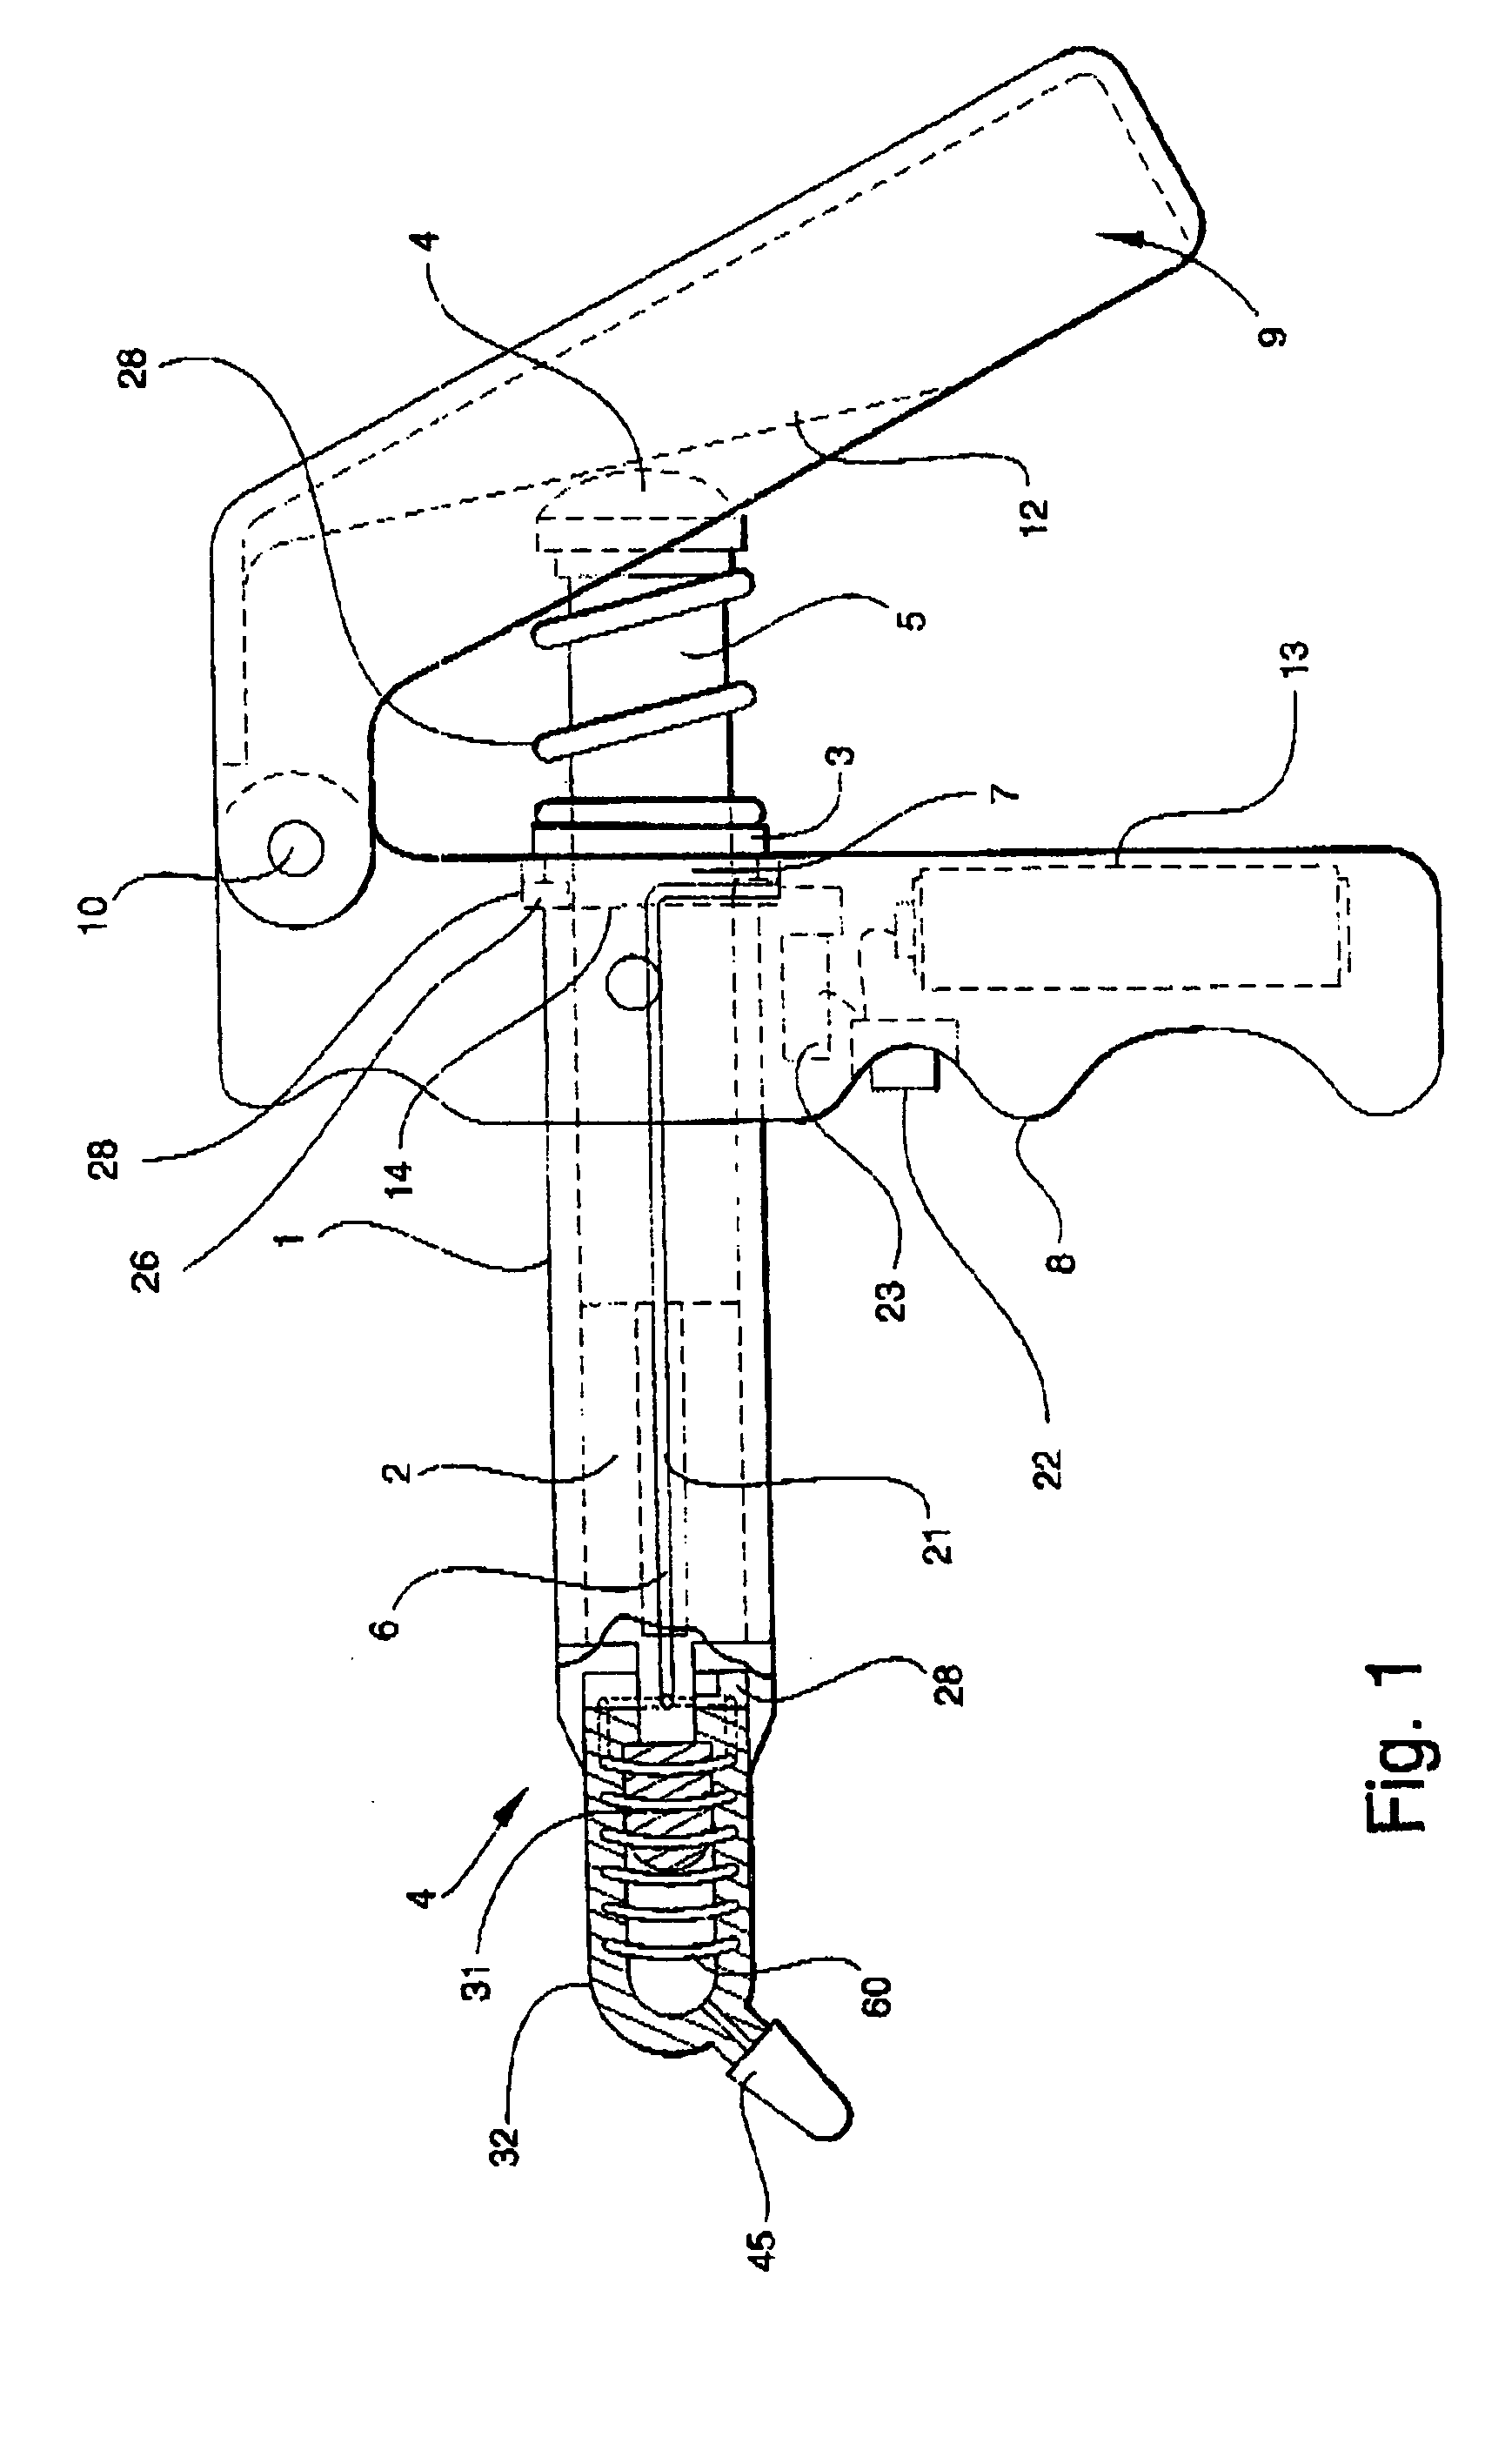 System for dispensing viscous materials